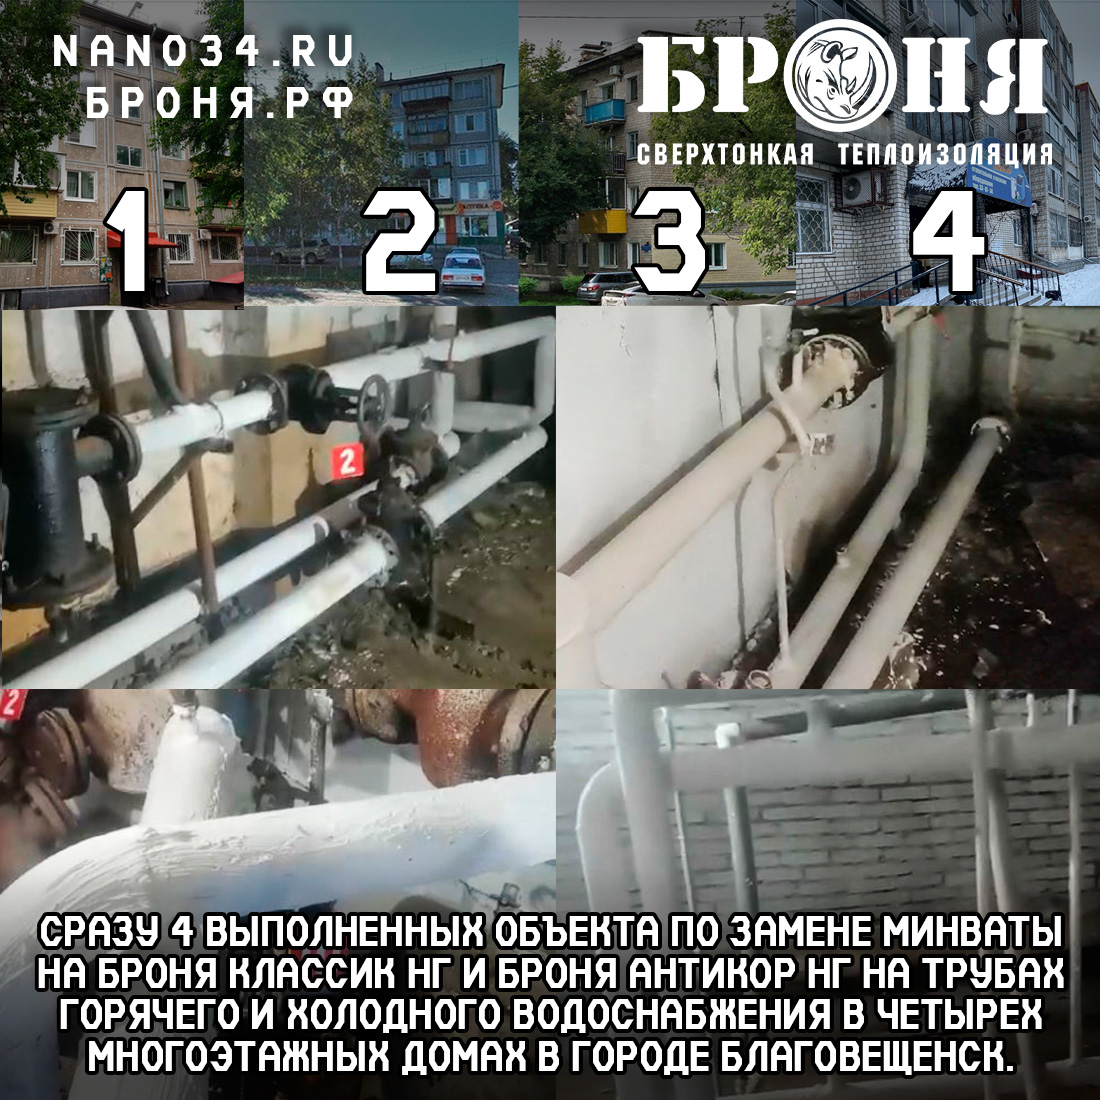 4 completed objects at once ( in 4 houses ) according to the overhaul program, the replacement of mineral wool with Bronya Classic NG and Brony Antikor NG  hot and cold water pipes in four multi-storey buildings in the city of Blagoveshchensk. (4 videos 